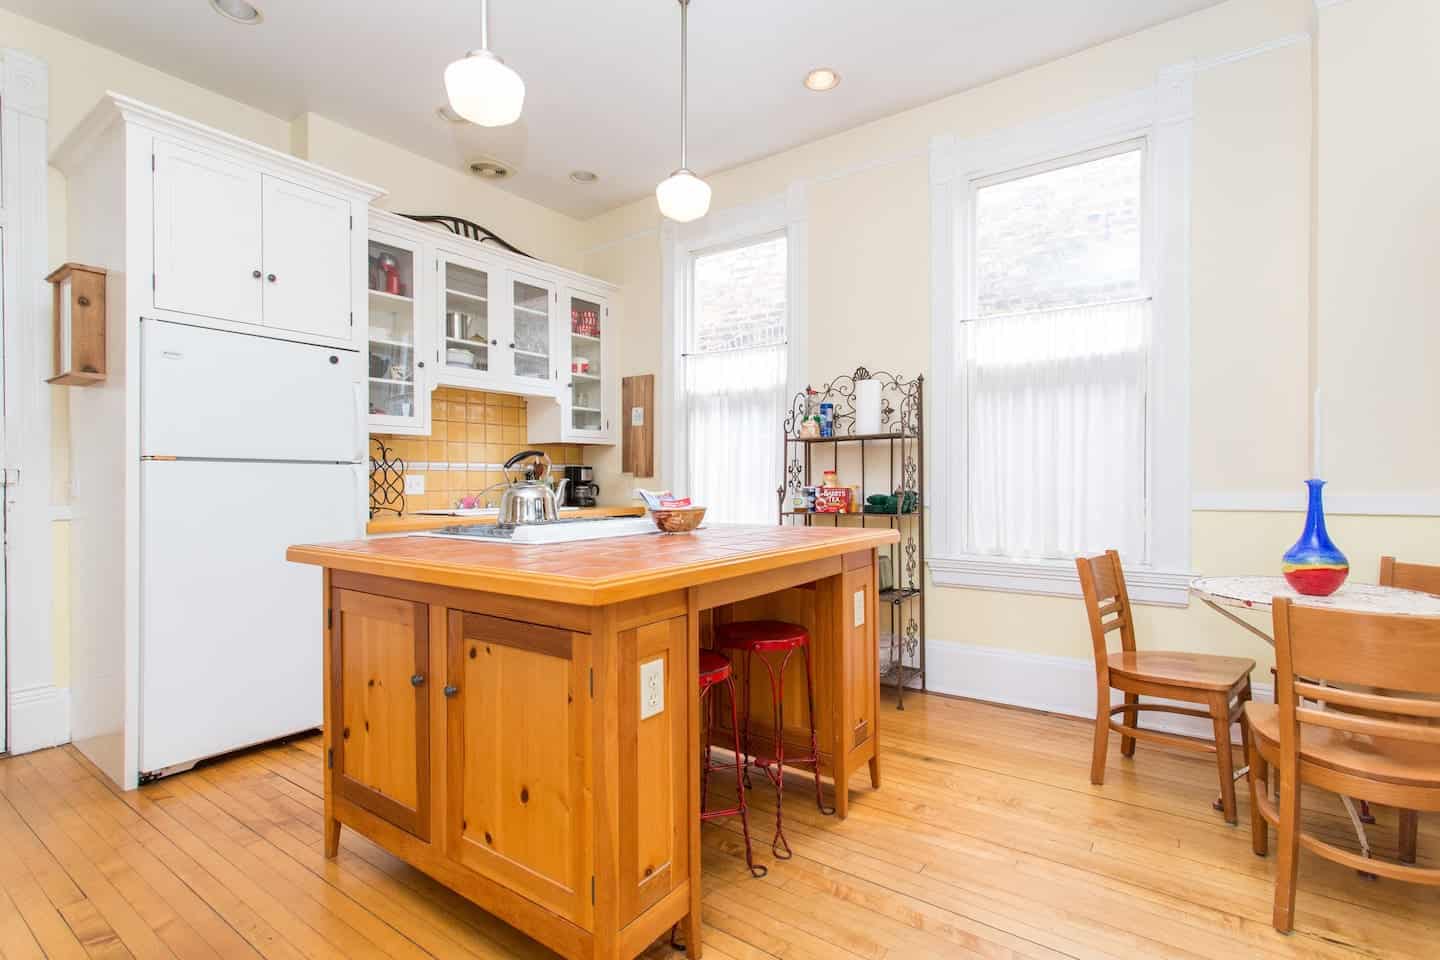 Image of Airbnb rental in Chicago, Illinois